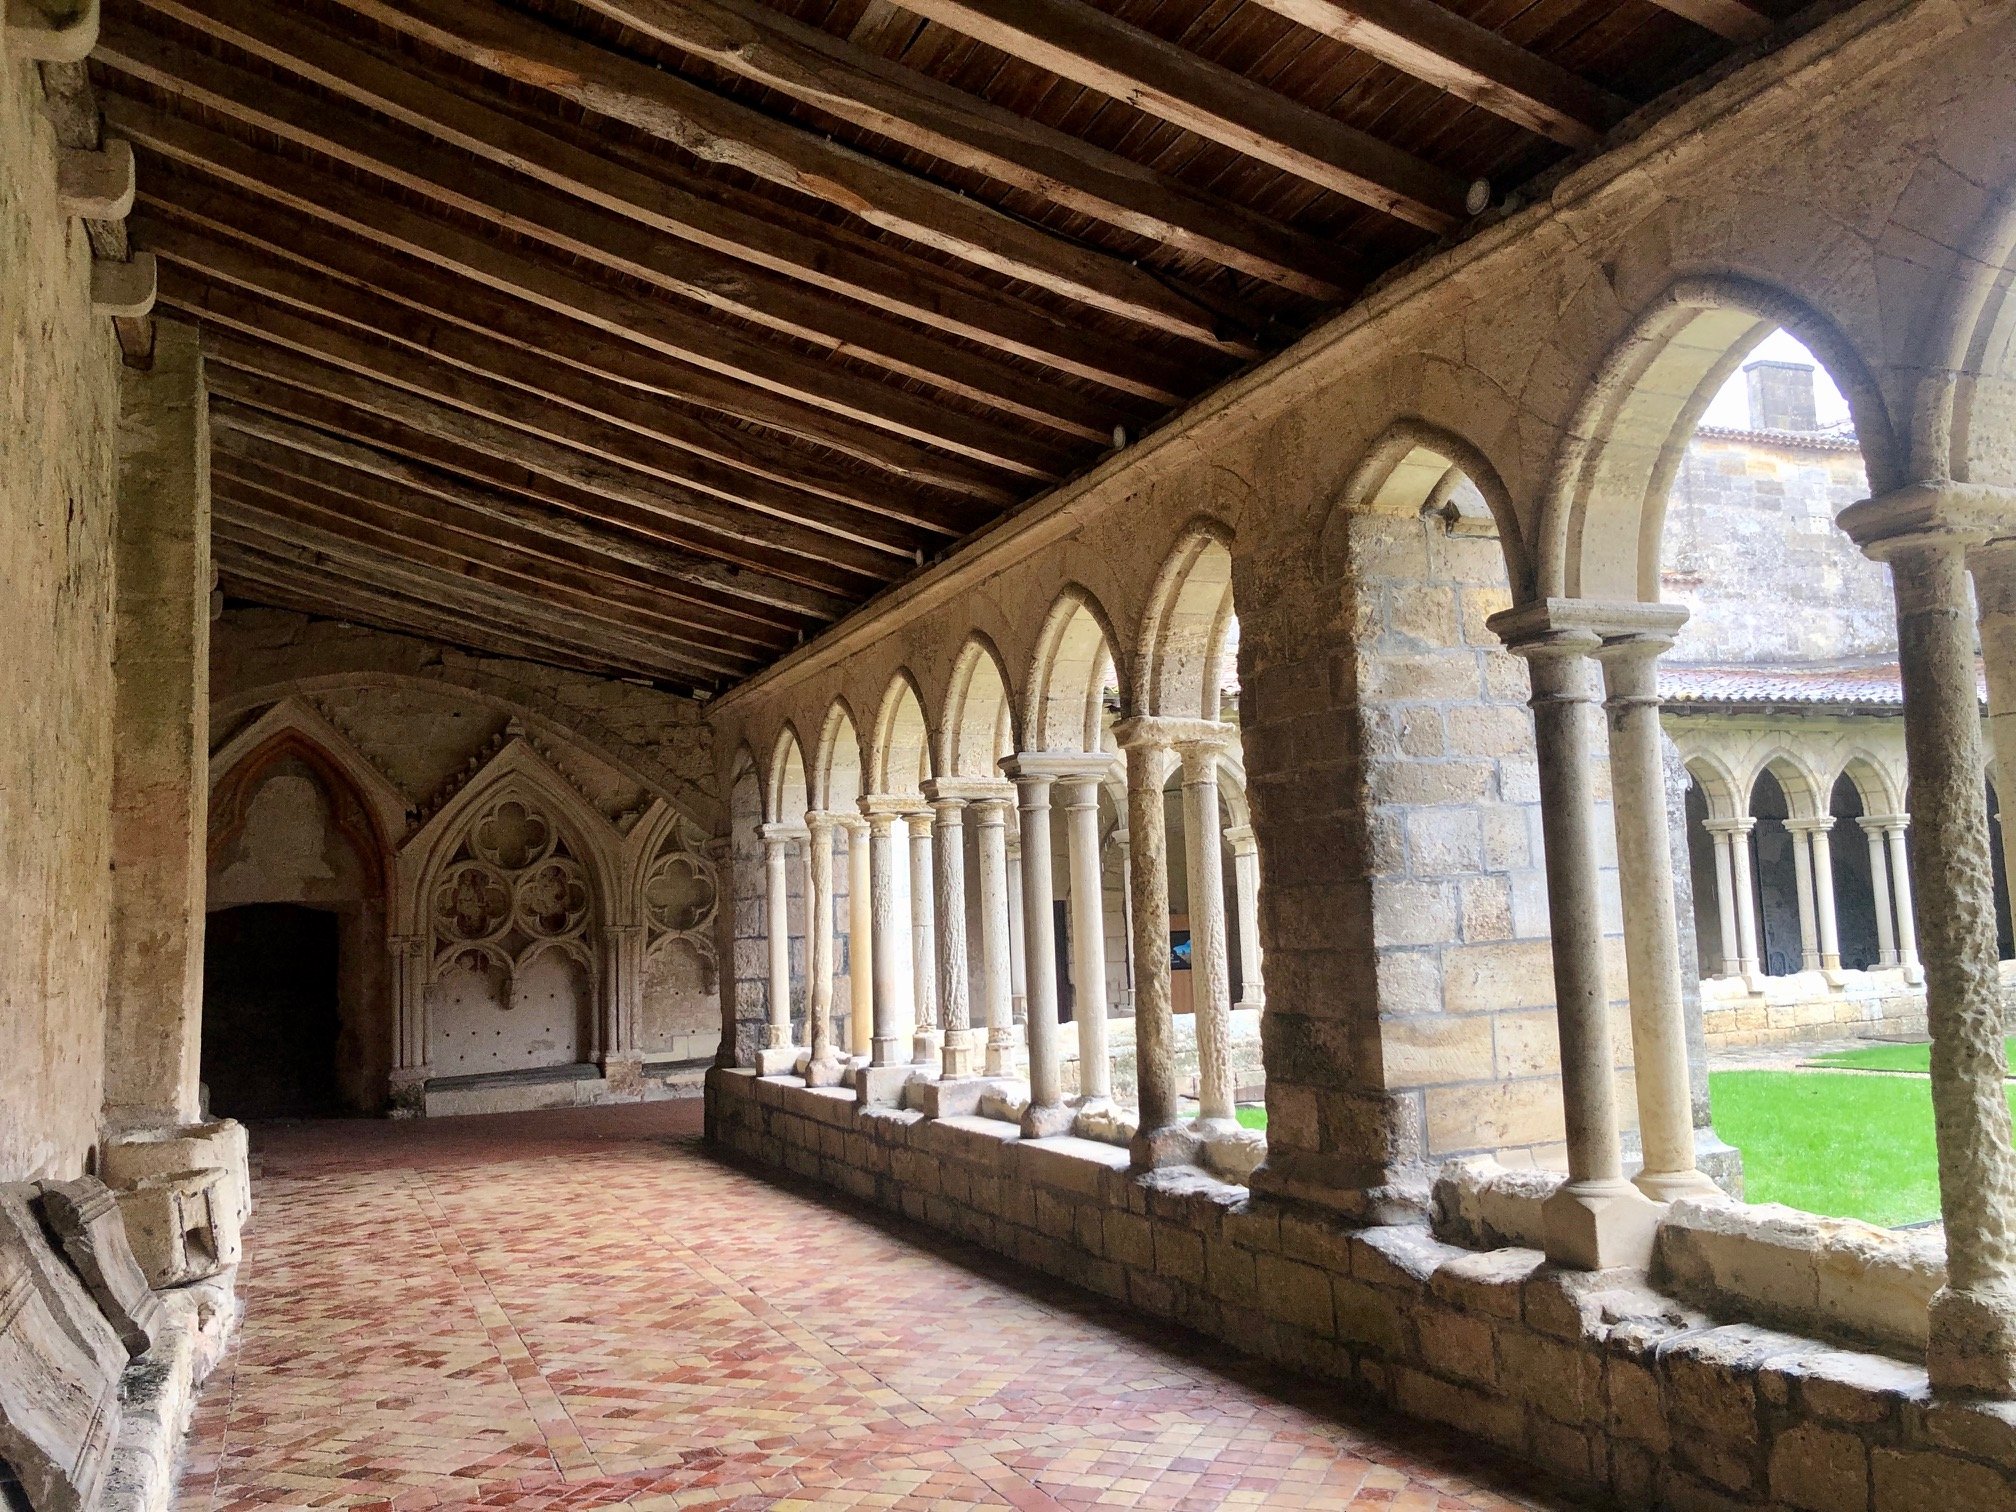  The cloister at the church in Saint-Emilion is just amazing. 